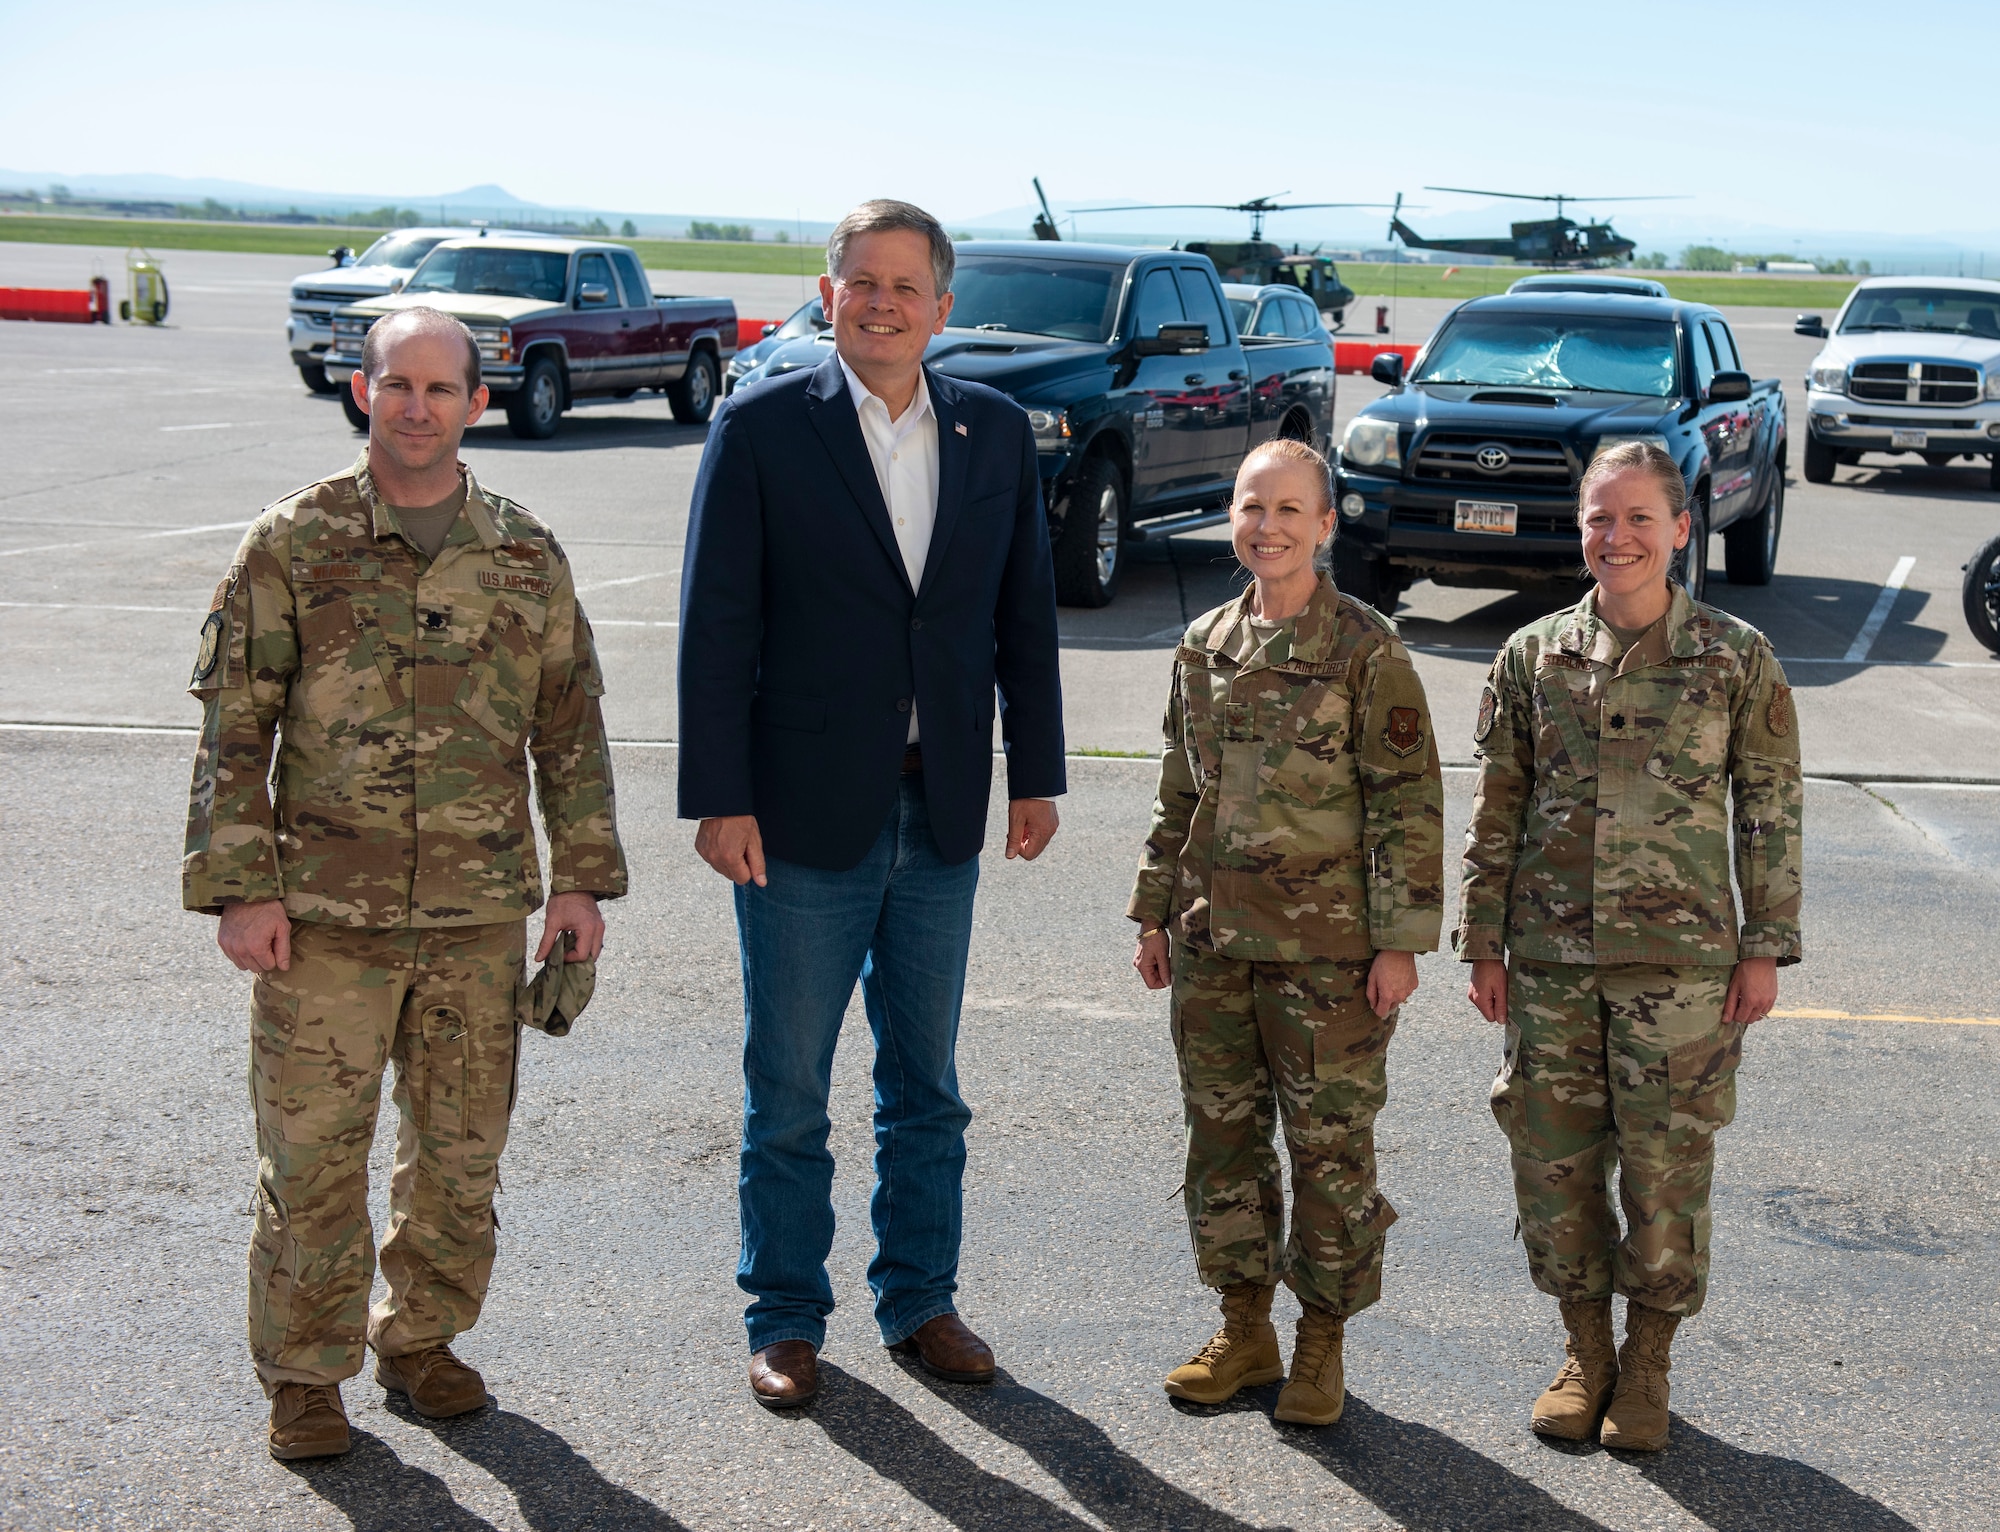 From left to right, Lt Col. Kevin Weaver, 40th Helicopter Squadron commander, Sen. Steve Daines, Col. Anita Feugate Opperman, 341st Missile Wing commander, and Lt. Col. Michelle Sterling, 341st Civil Engineer Squadron commander; pose for a photo June 3, 2021, during Daines’ trip to Malmstrom Air Force Base, Mont.